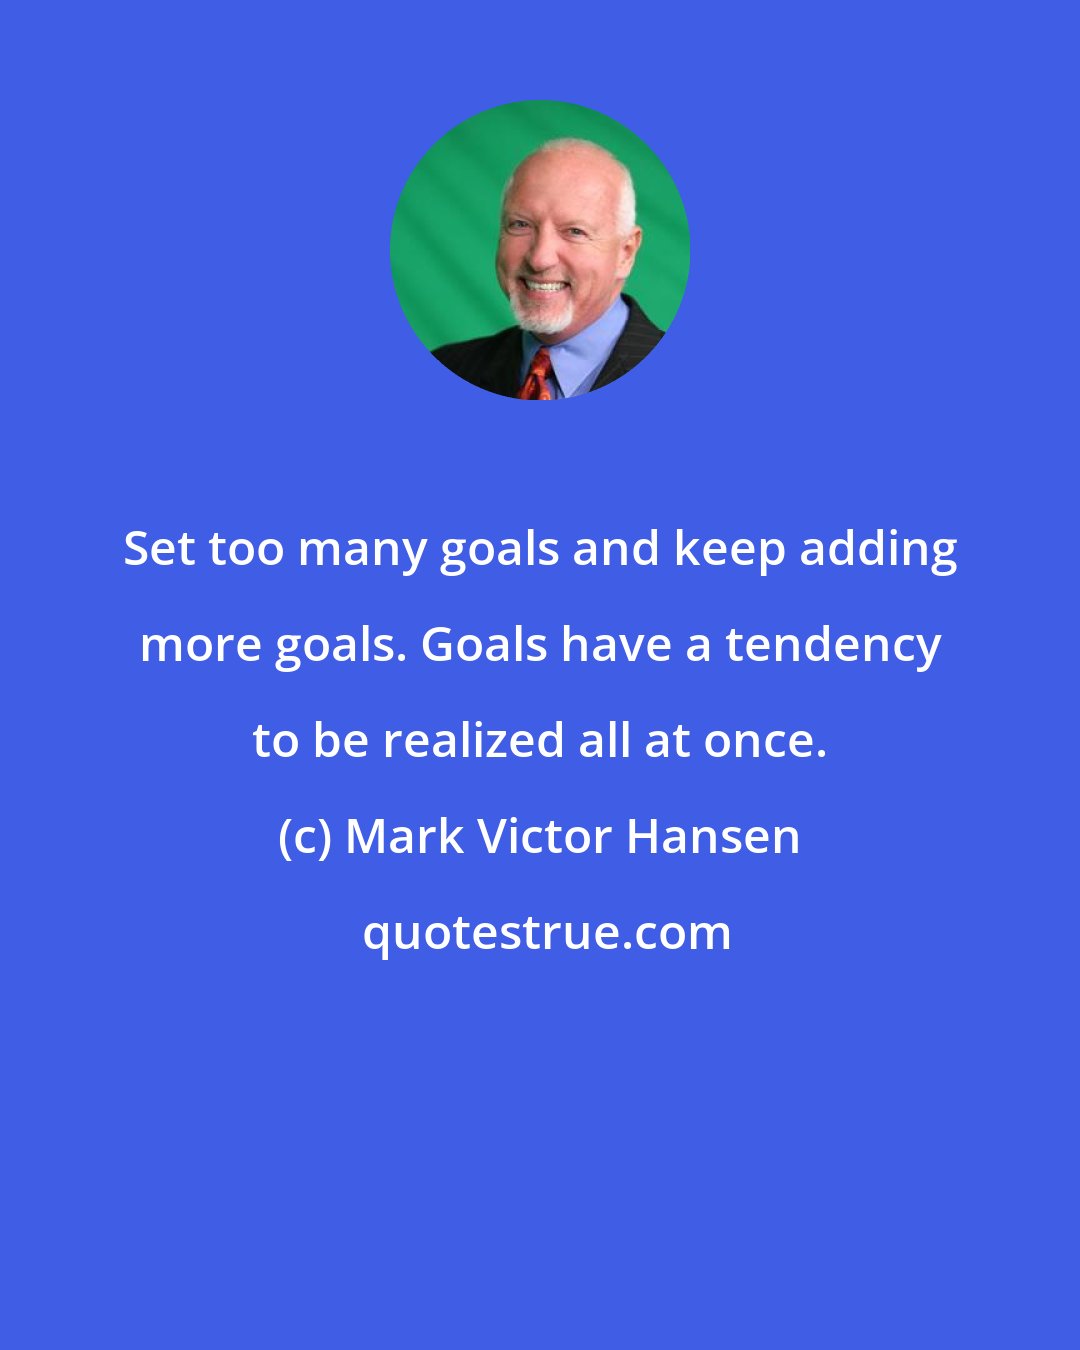 Mark Victor Hansen: Set too many goals and keep adding more goals. Goals have a tendency to be realized all at once.